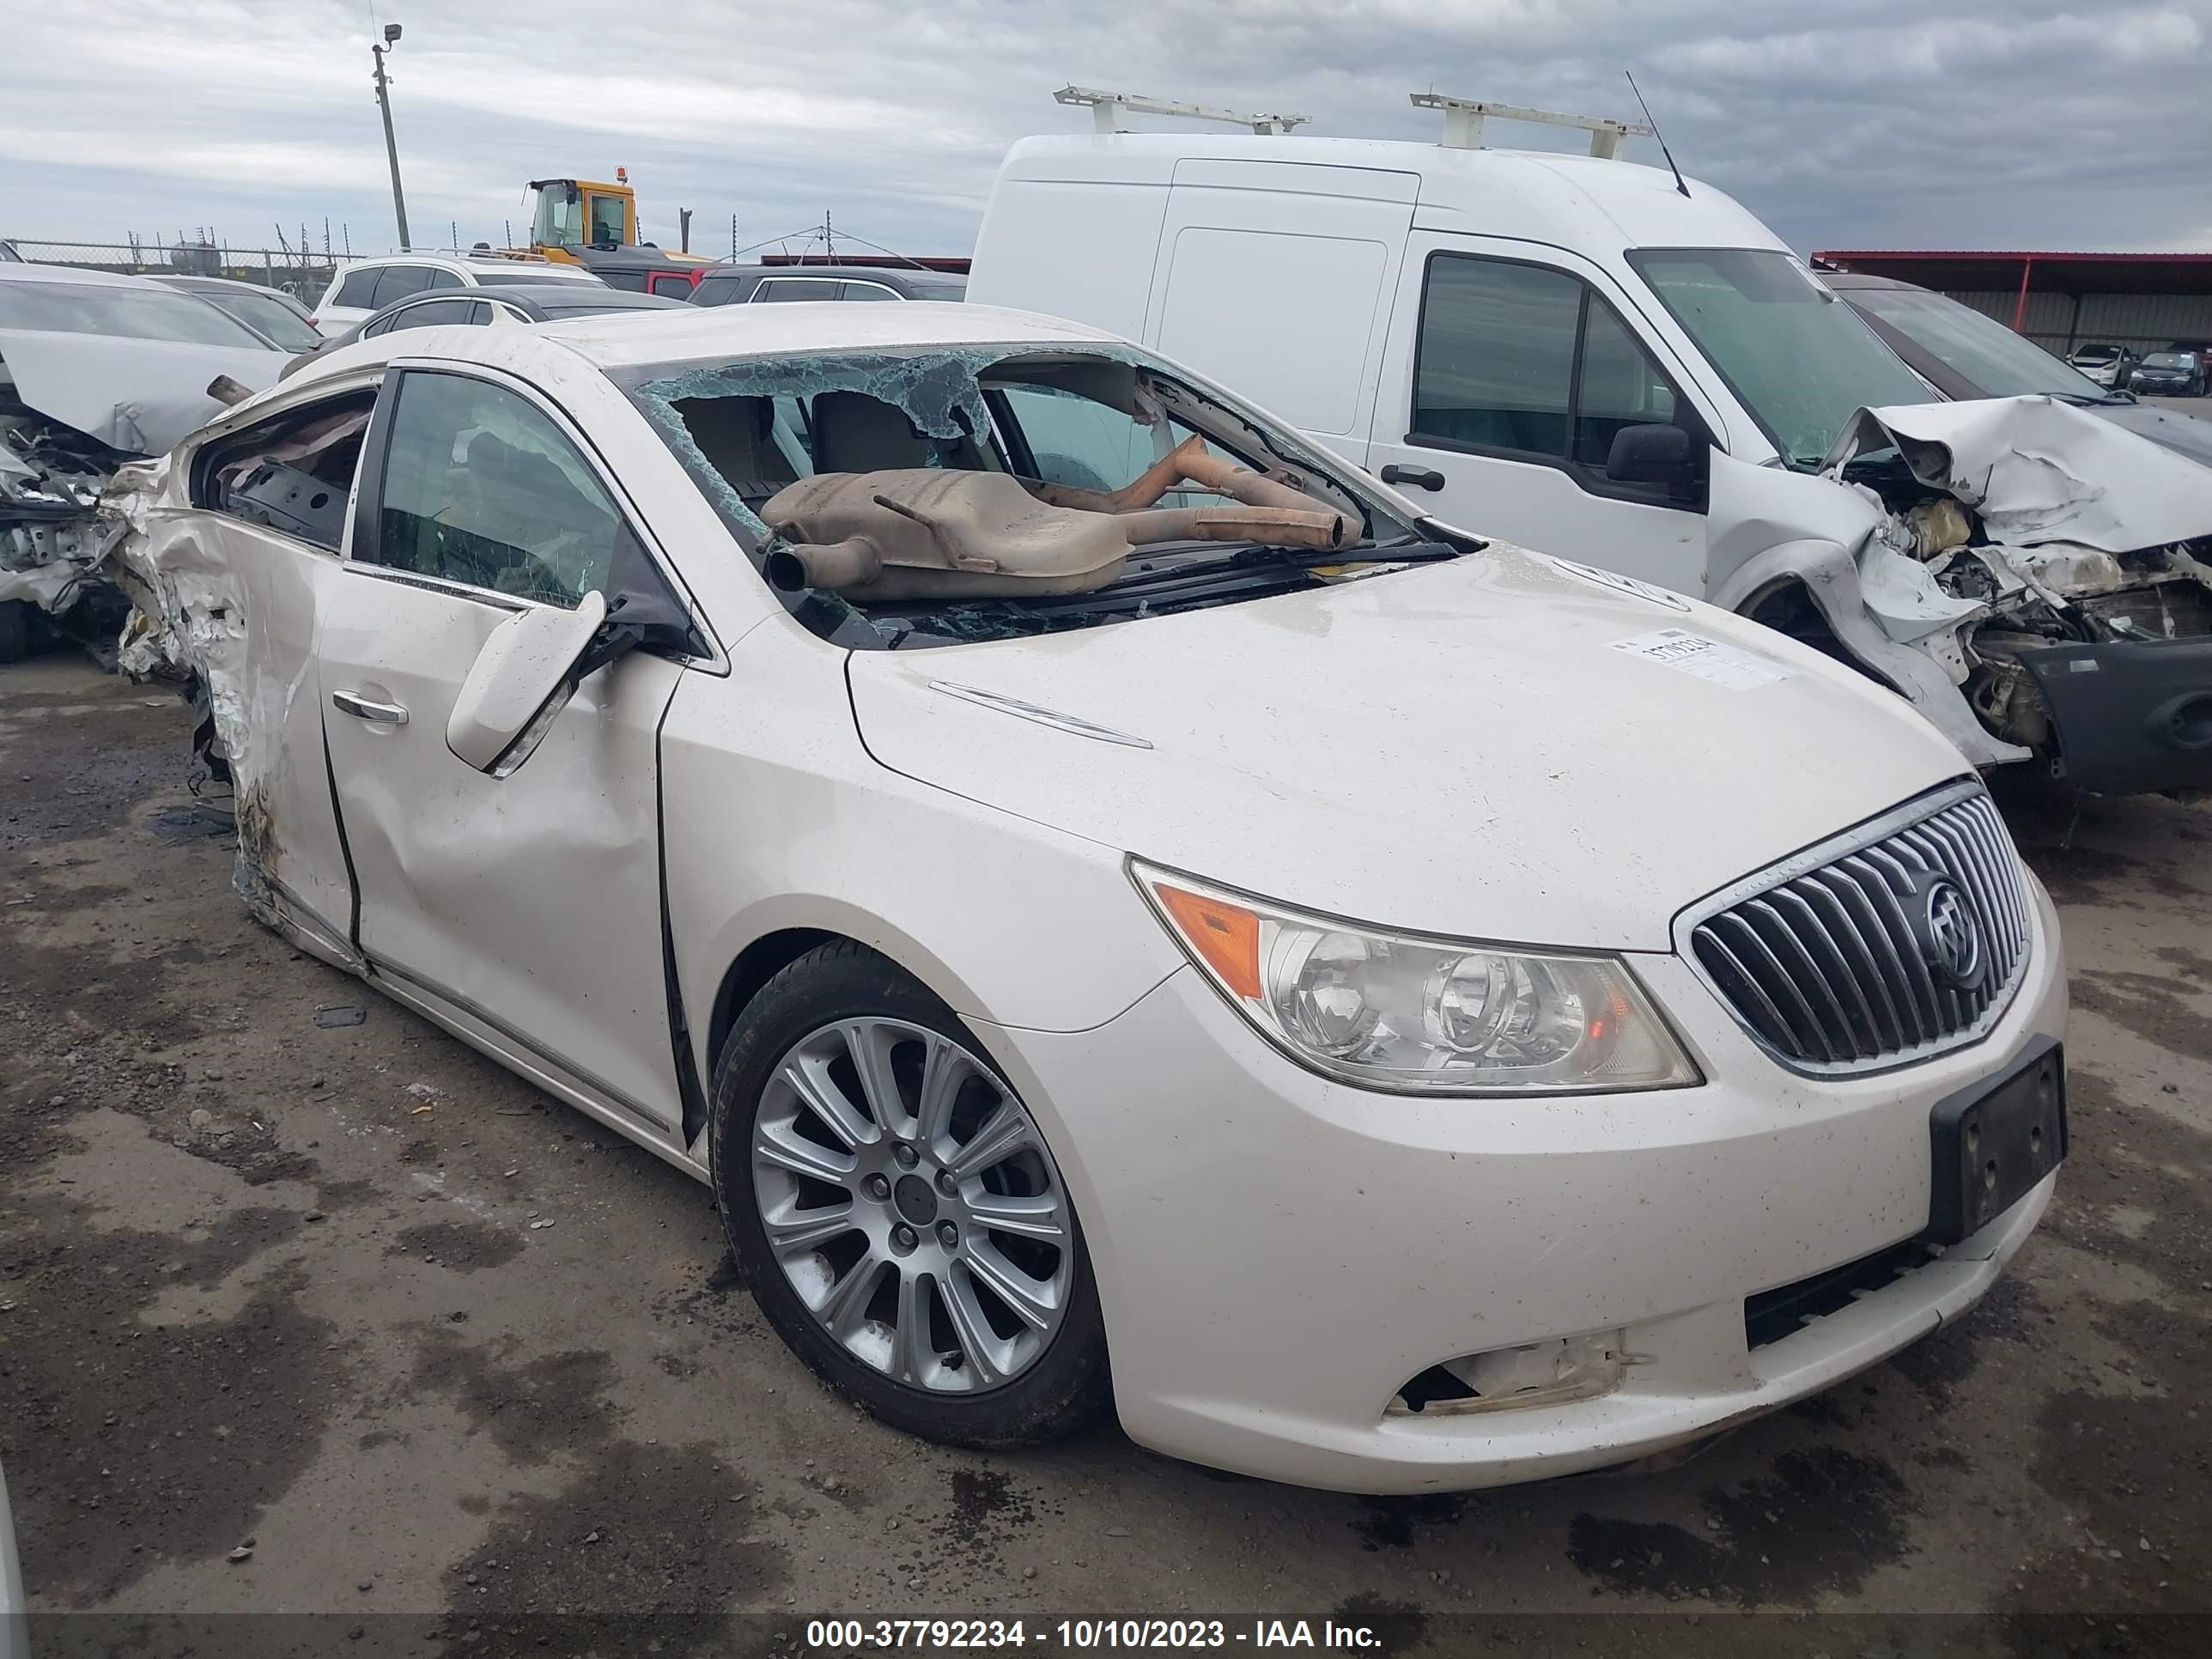 vin: 1G4GC5E37DF235354 1G4GC5E37DF235354 2013 buick lacrosse 3600 for Sale in 78616, 2191 Highway 21 West, Dale, USA